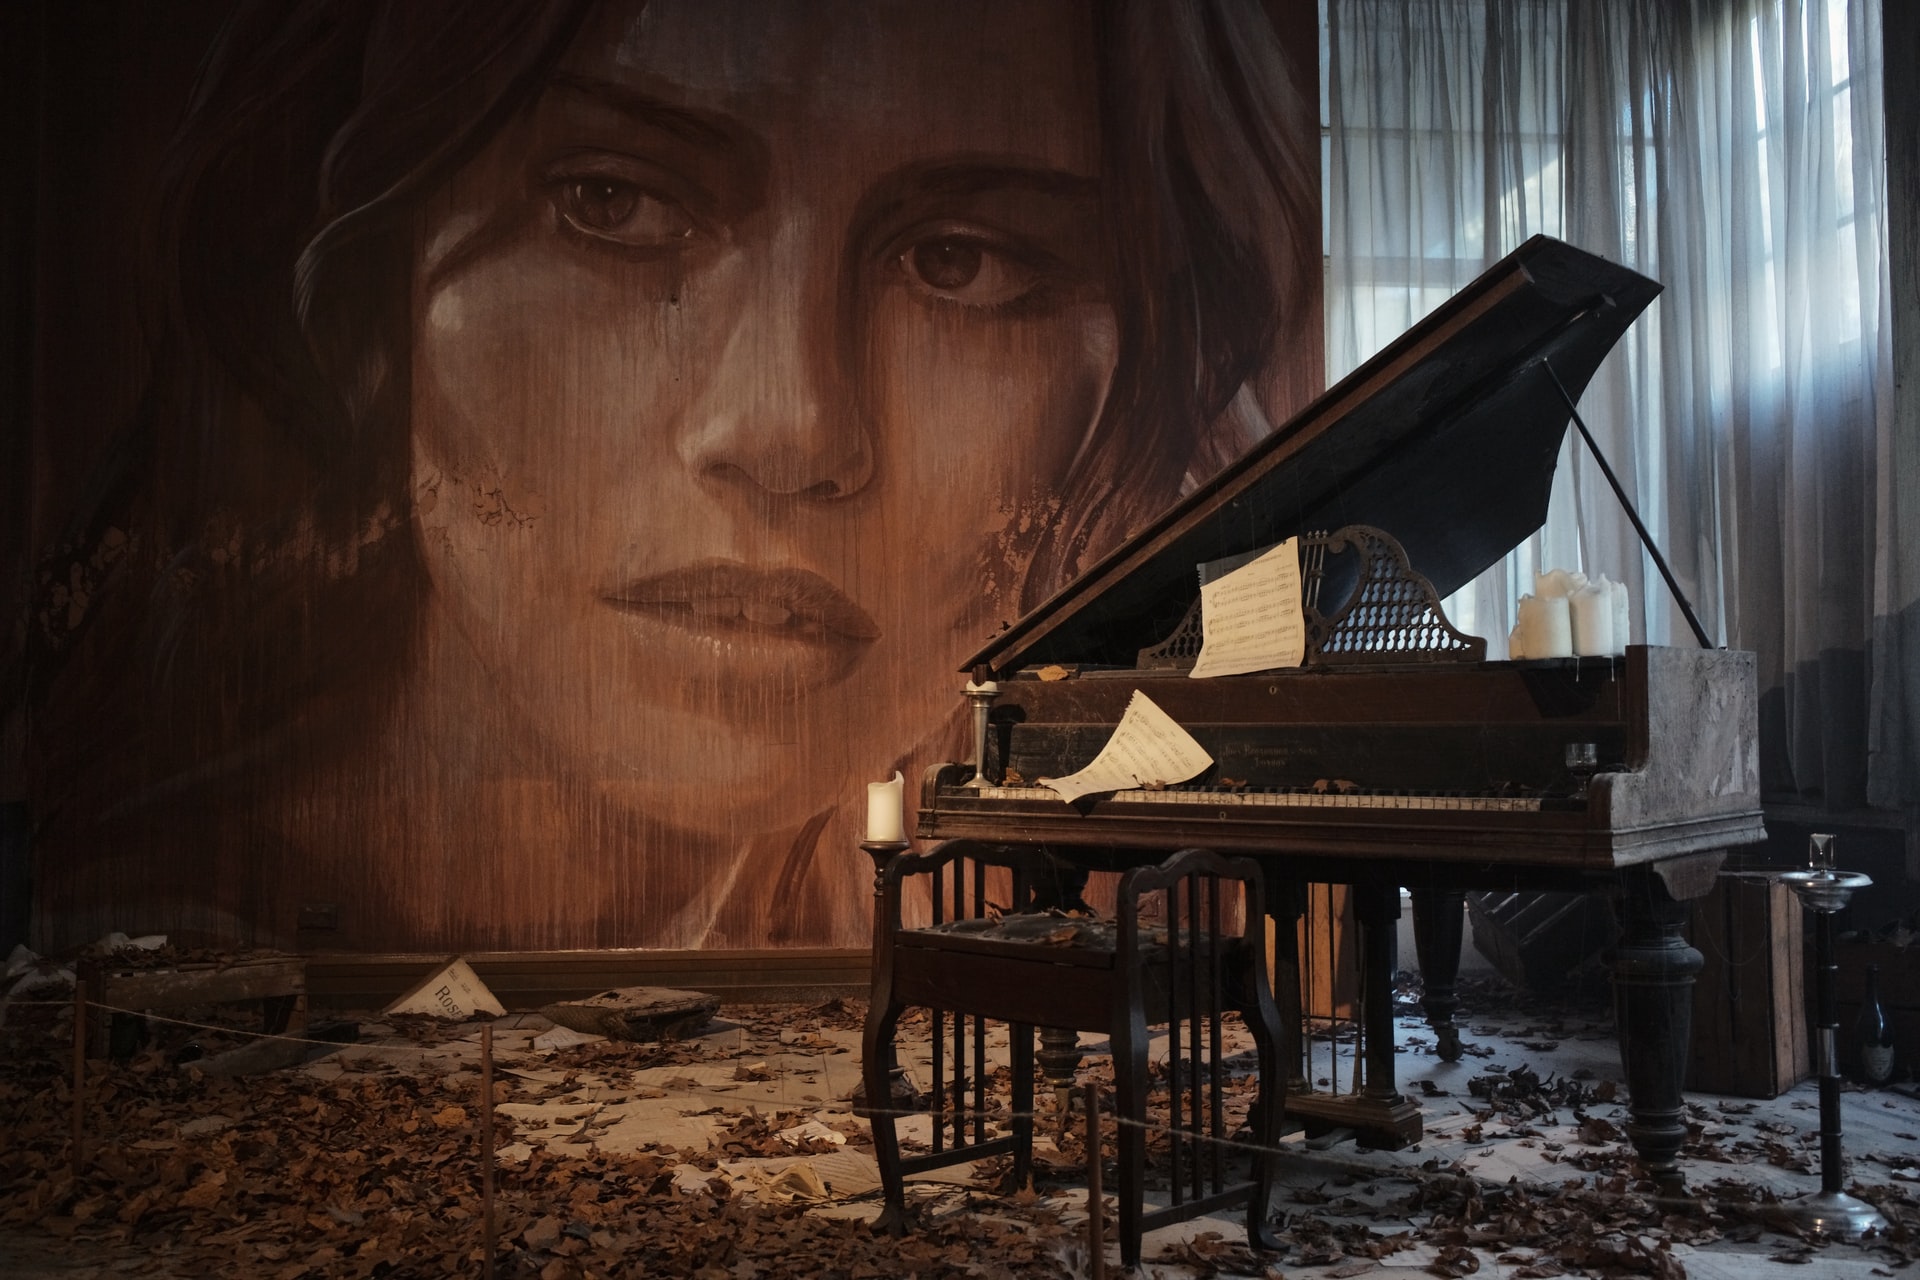 Vertical Piano In an Old House With a Woman Painting